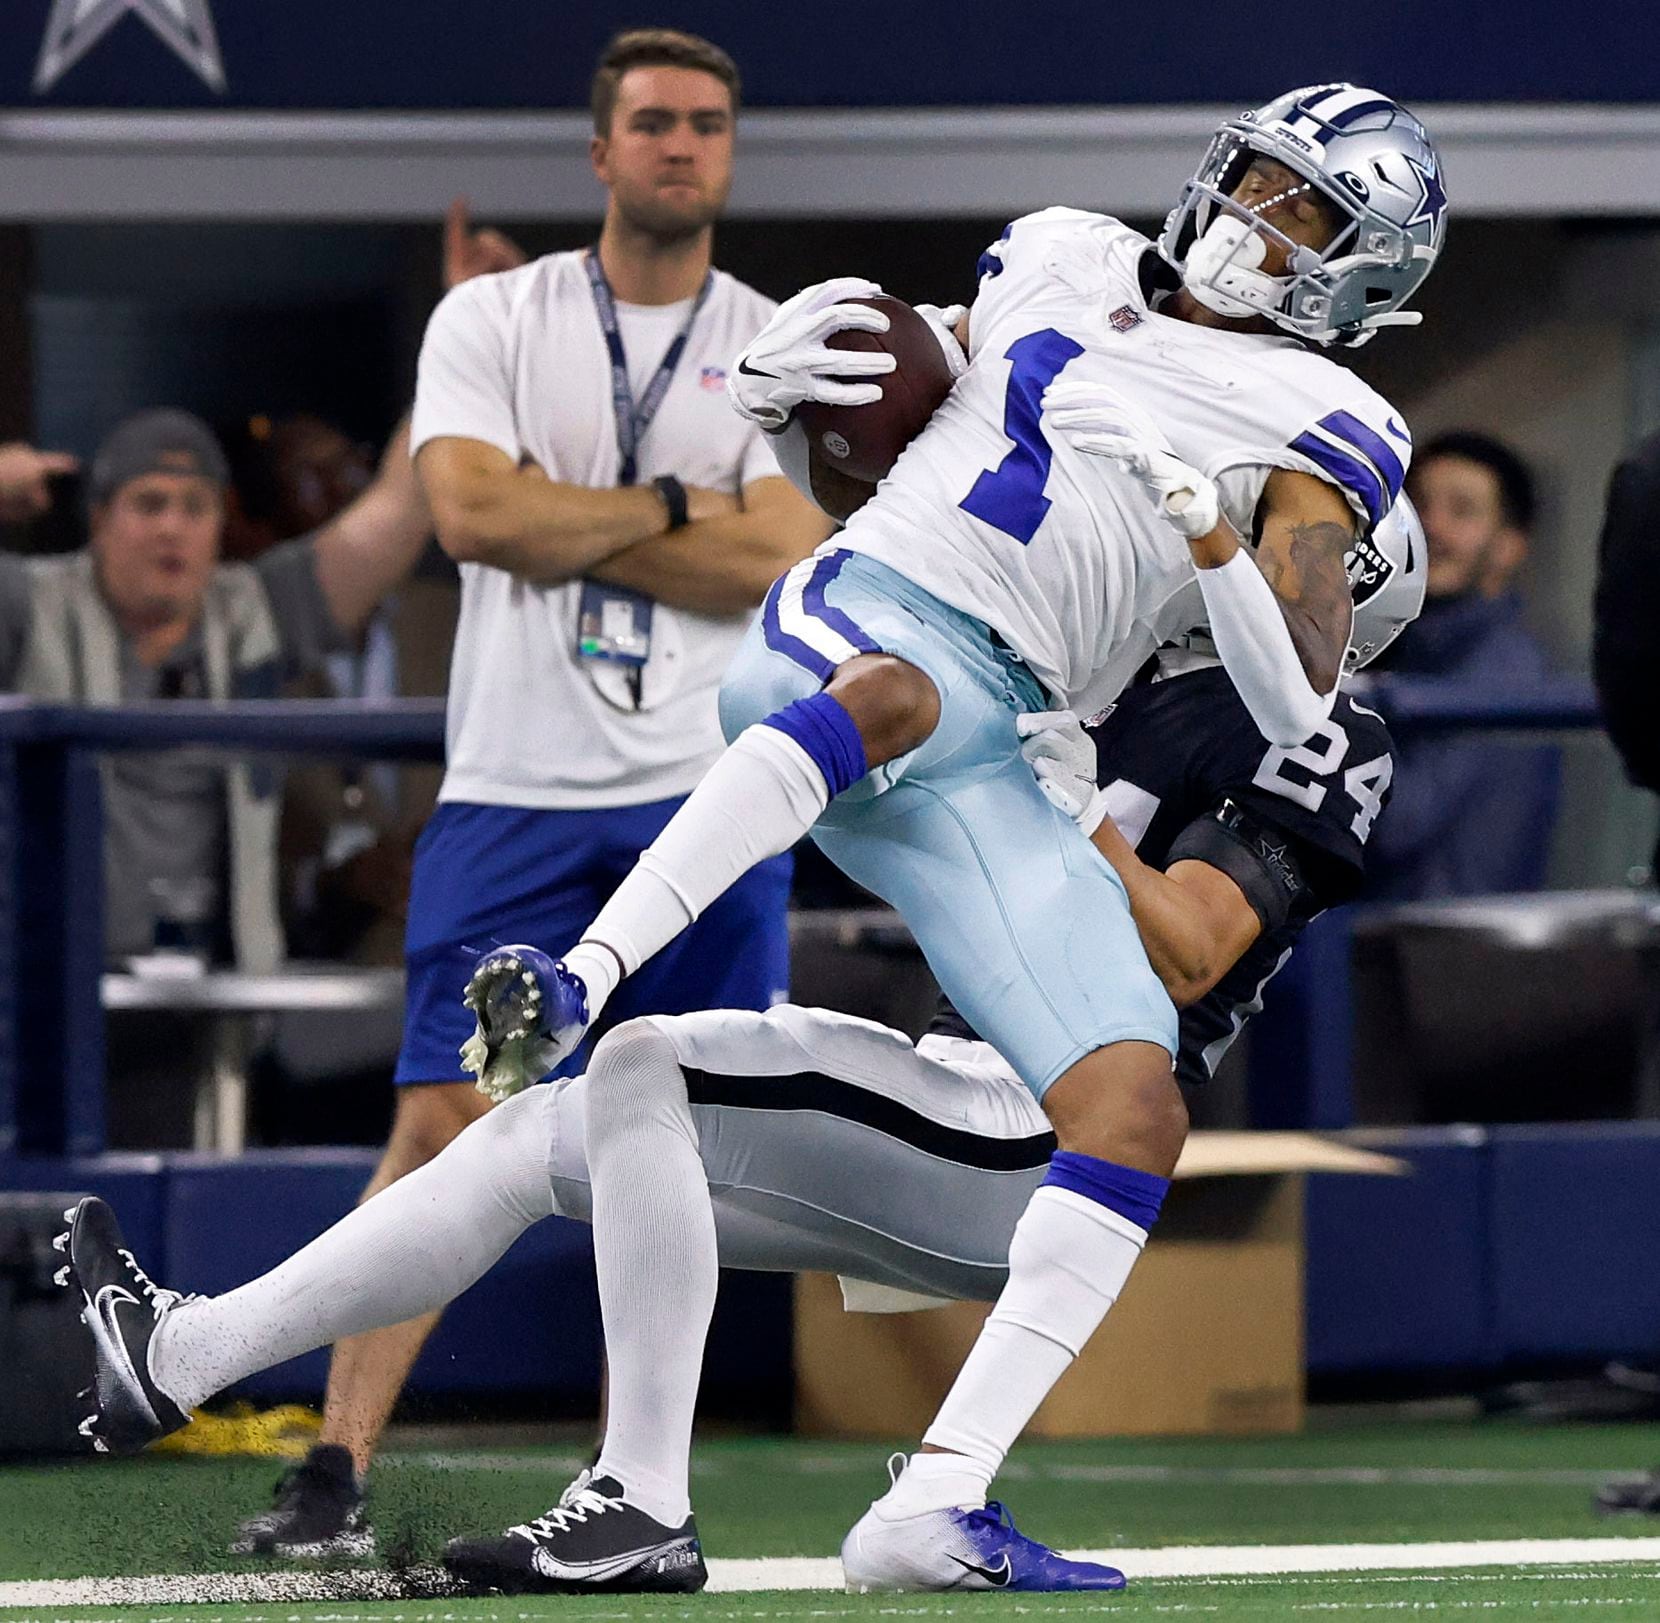 Dallas Cowboys wide receiver Ced Wilson (1) is spin around and out of bounds by Las Vegas Raiders safety Johnathan Abram (24) after a long second quarter pass completion at AT&T Stadium in Arlington, November 25, 2021. (Tom Fox/The Dallas Morning News)